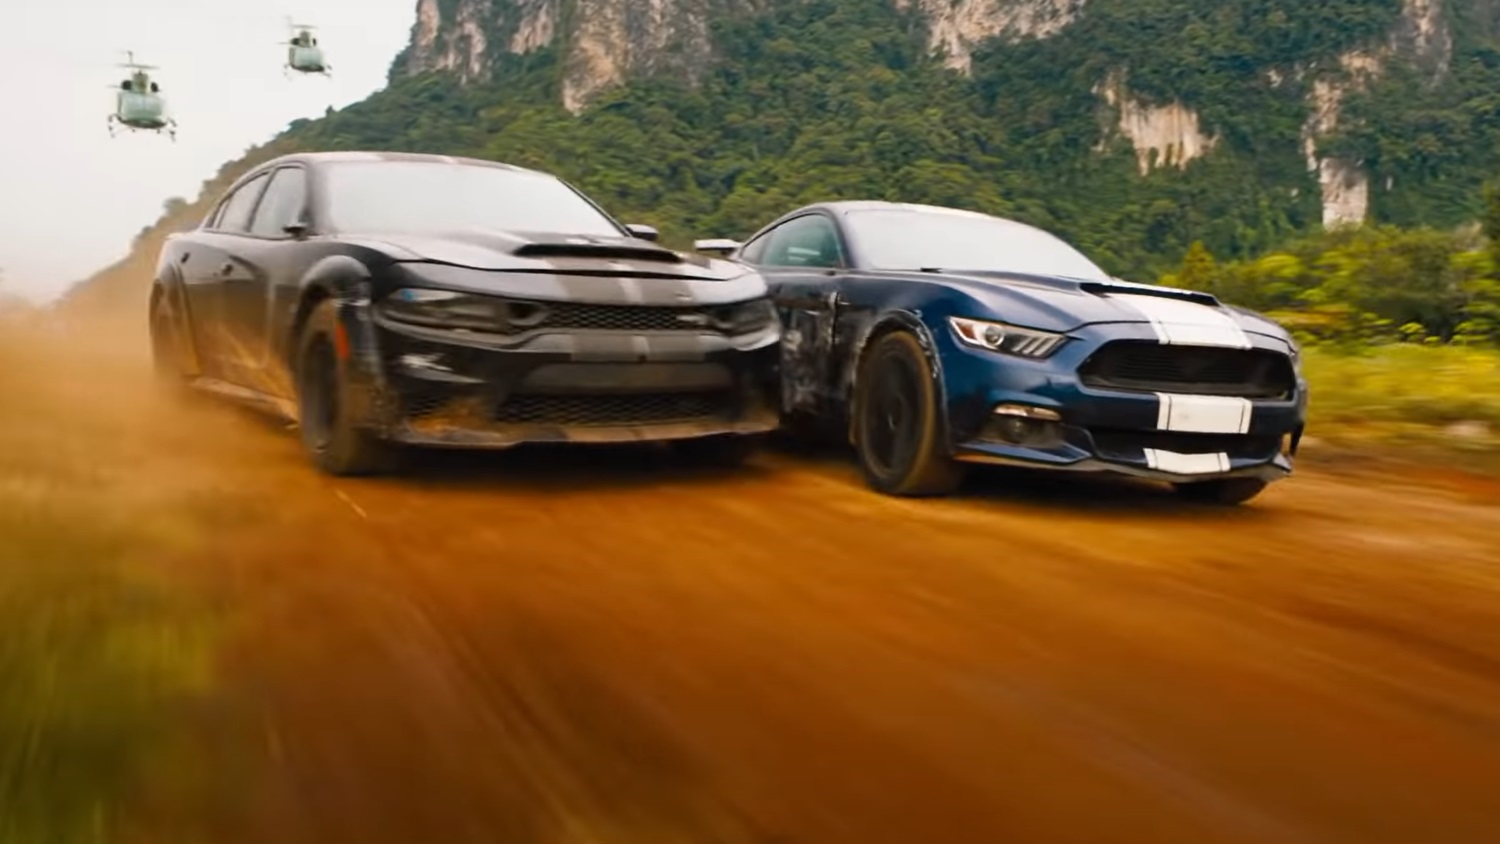 Fast & Furious 9 Trailer Stars Ford Mustang Hitching Ride On Jet